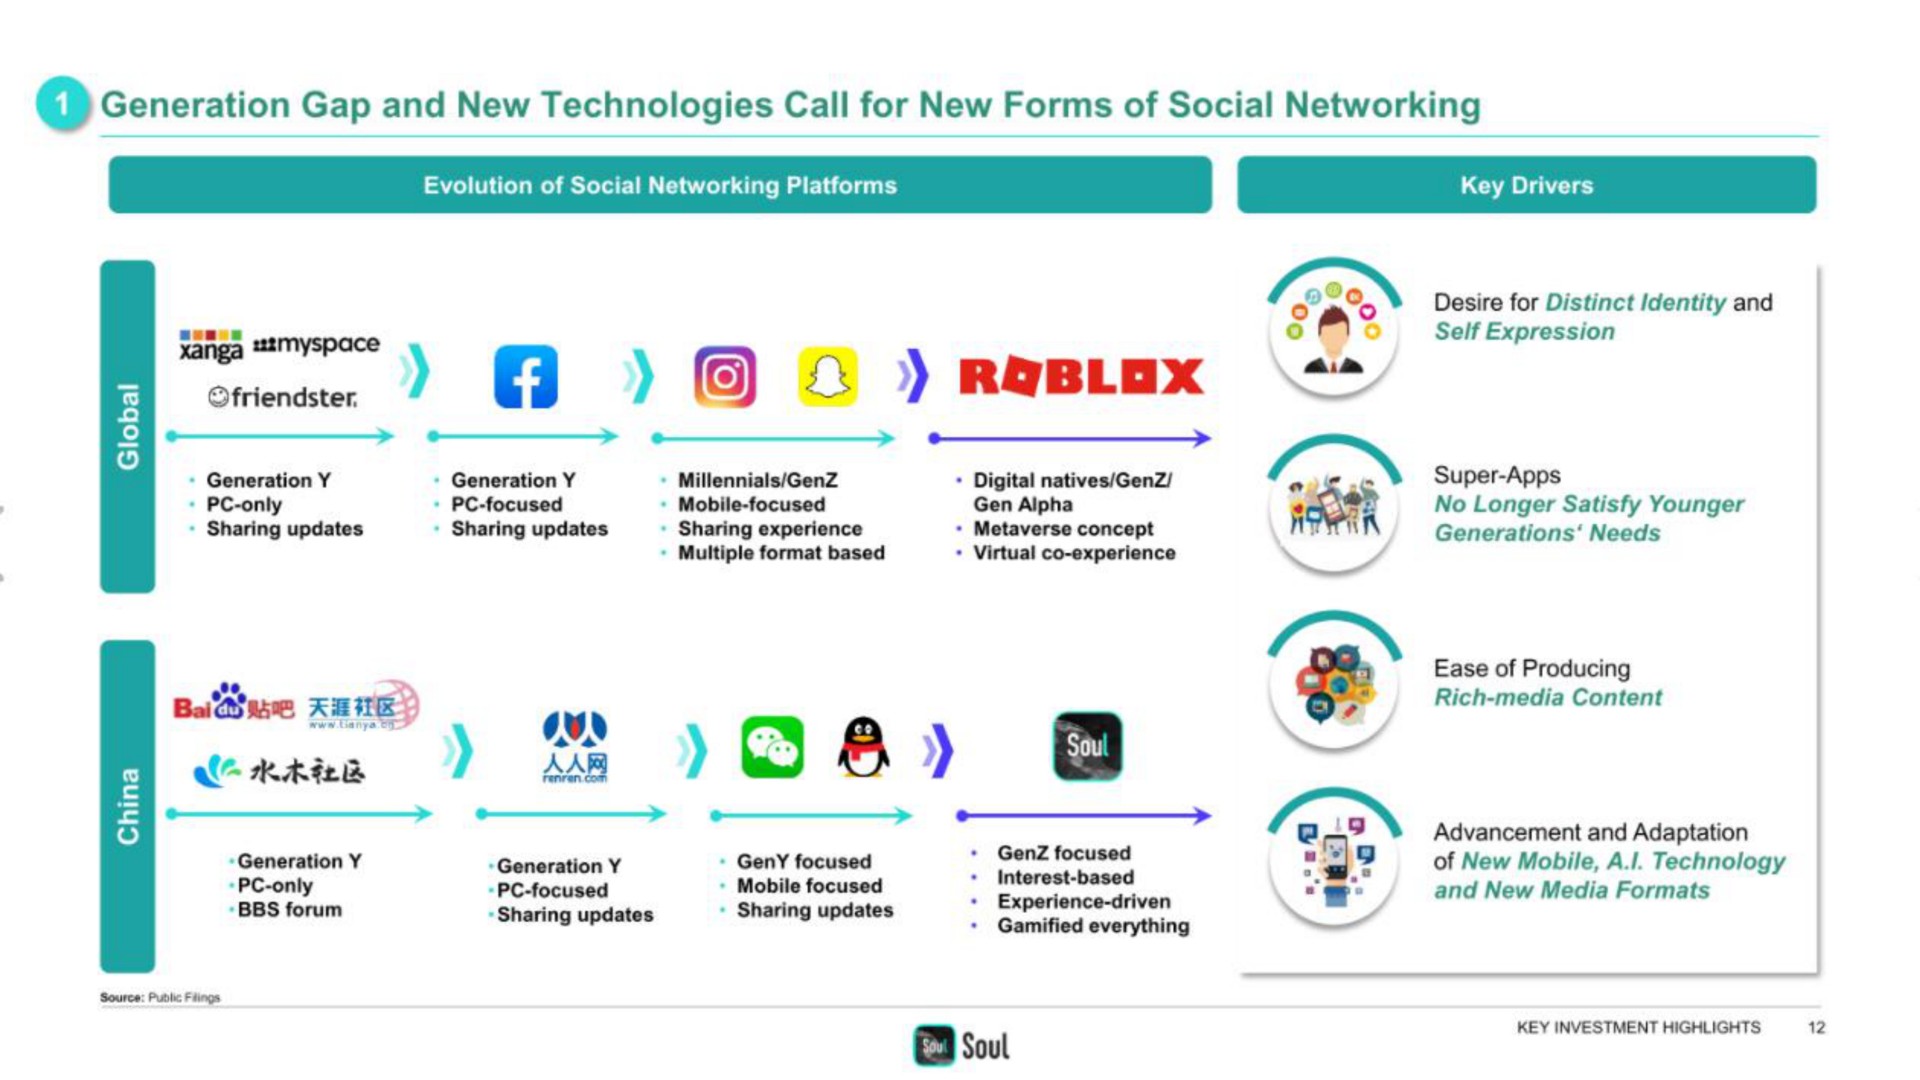 a generation gap and new technologies call for new forms of social networking a of desire for distinct identity and aas my | Soulgate